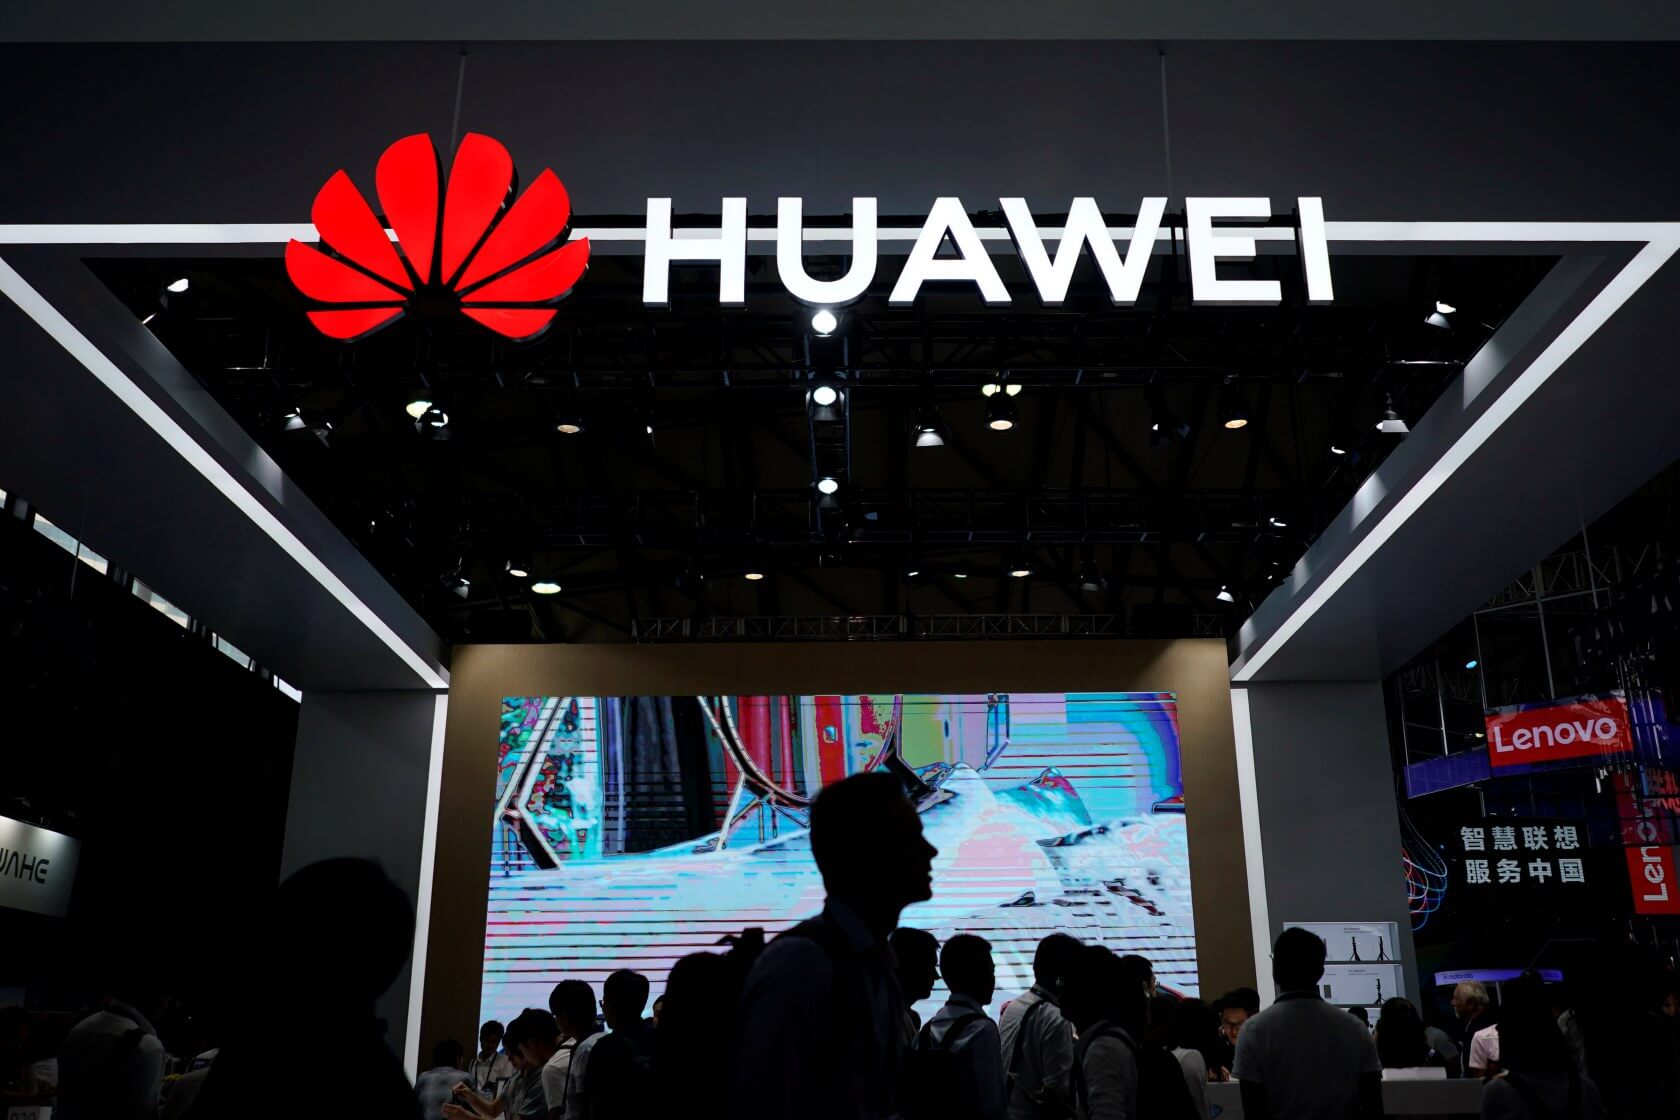 CIA reportedly says Huawei is funded by Chinese state security